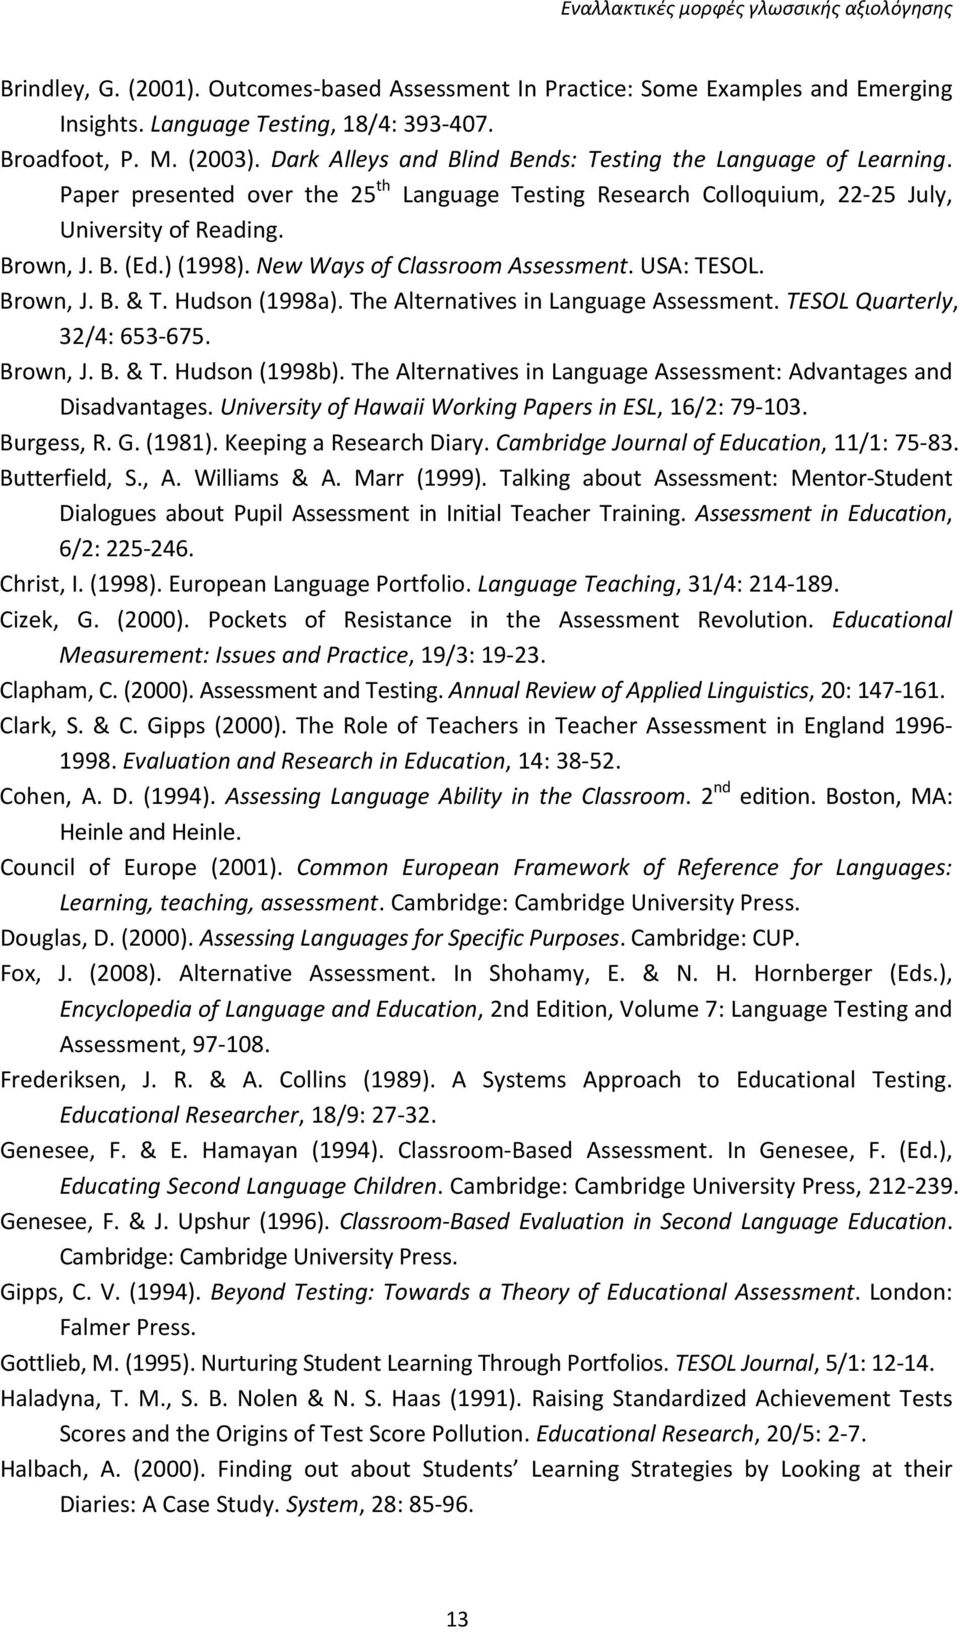 New Ways of Classroom Assessment. USA: TESOL. Brown, J. B. & T. Hudson (1998a). The Alternatives in Language Assessment. TESOL Quarterly, 32/4: 653-675. Brown, J. B. & T. Hudson (1998b).